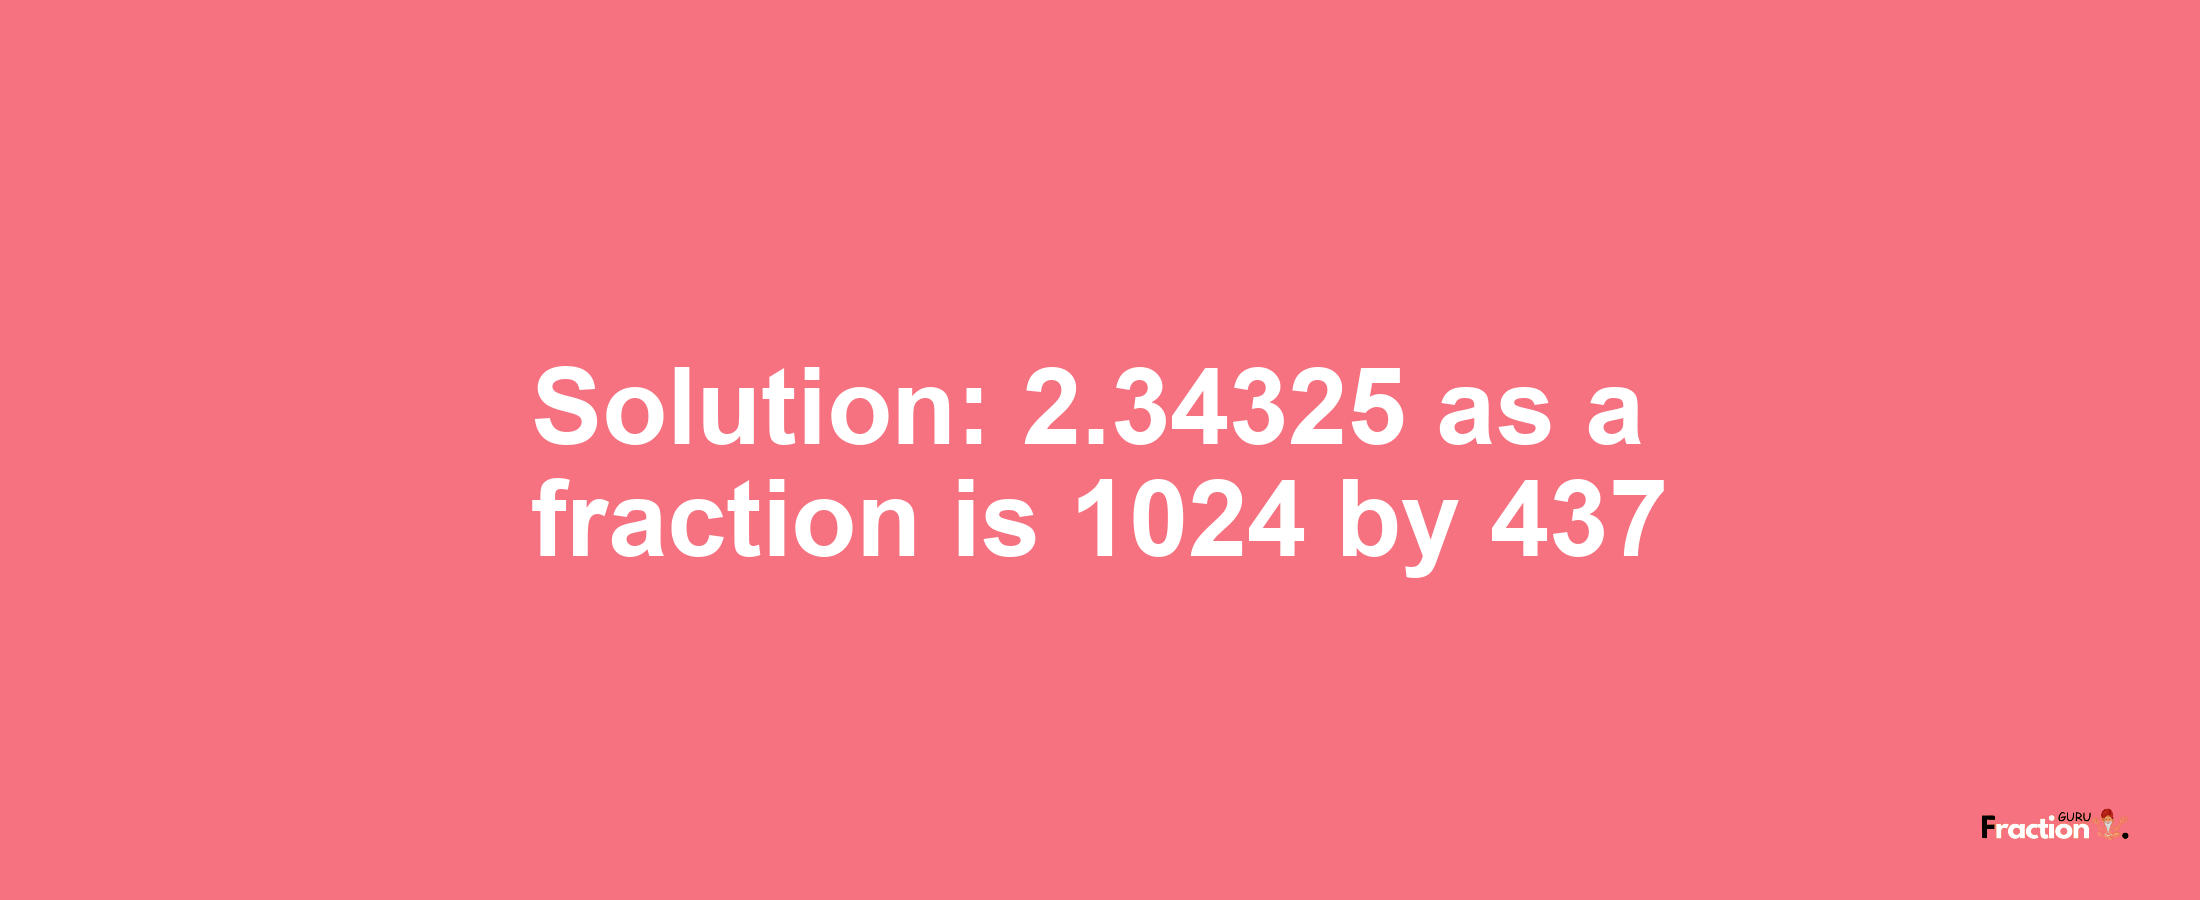 Solution:2.34325 as a fraction is 1024/437